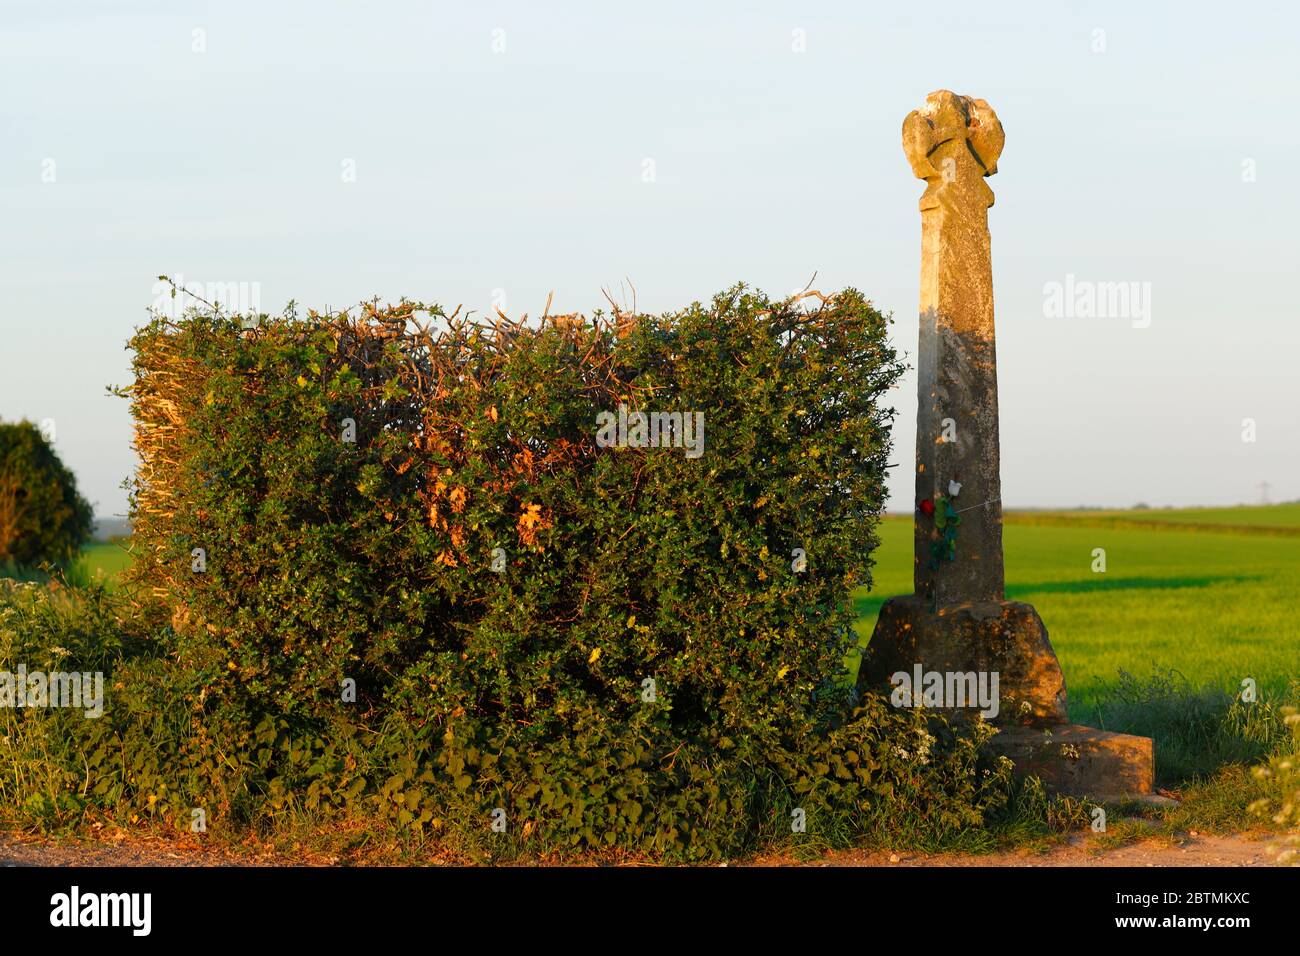 The Towton Cross stands next to farmland on what is known to be the bloodiest battle in Britain. The War Of The Roses. Stock Photo